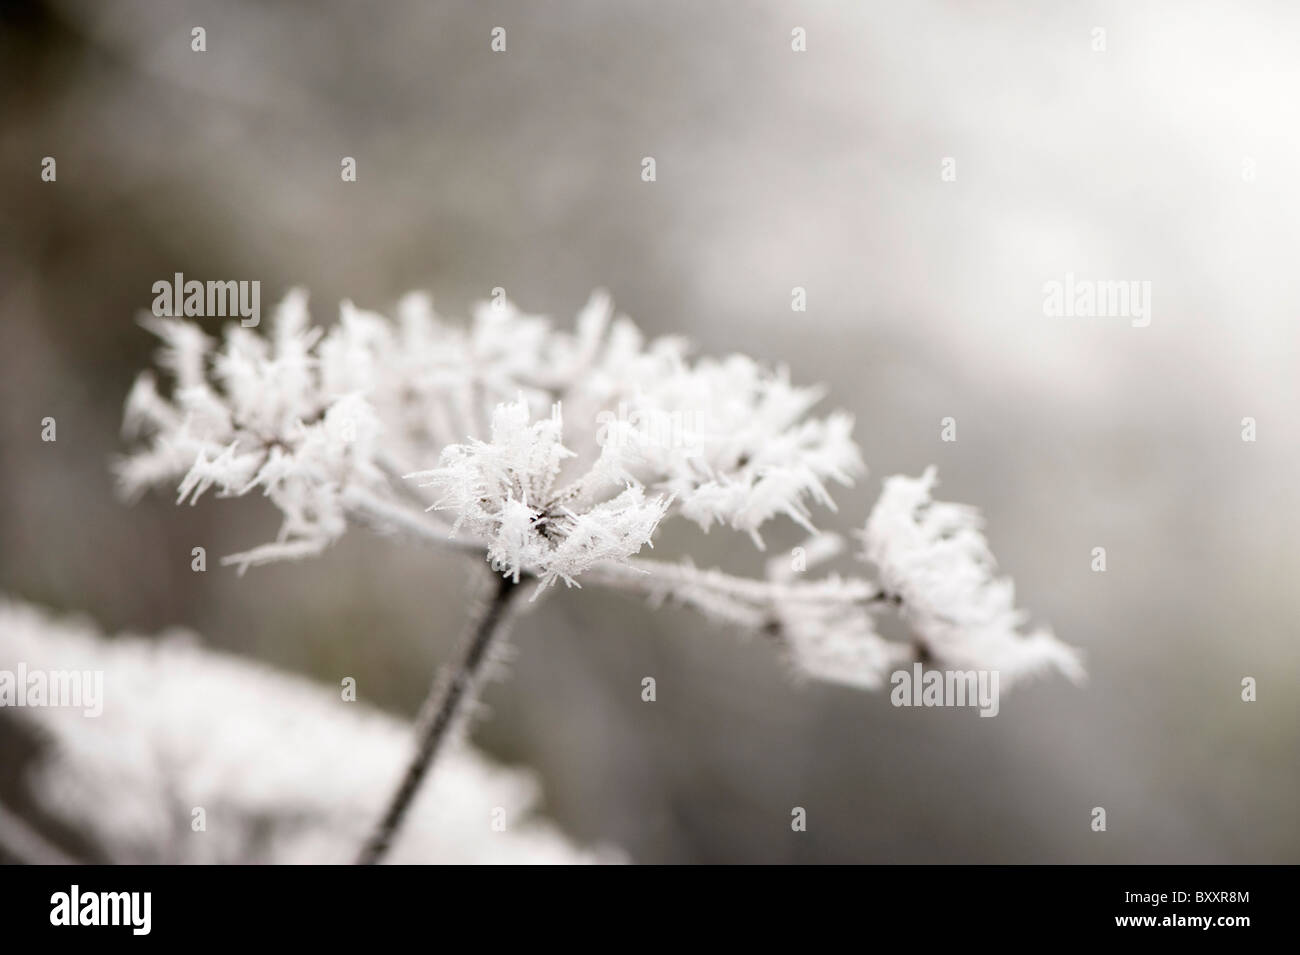 Hoar frost covered wildflowers in winter Stock Photo